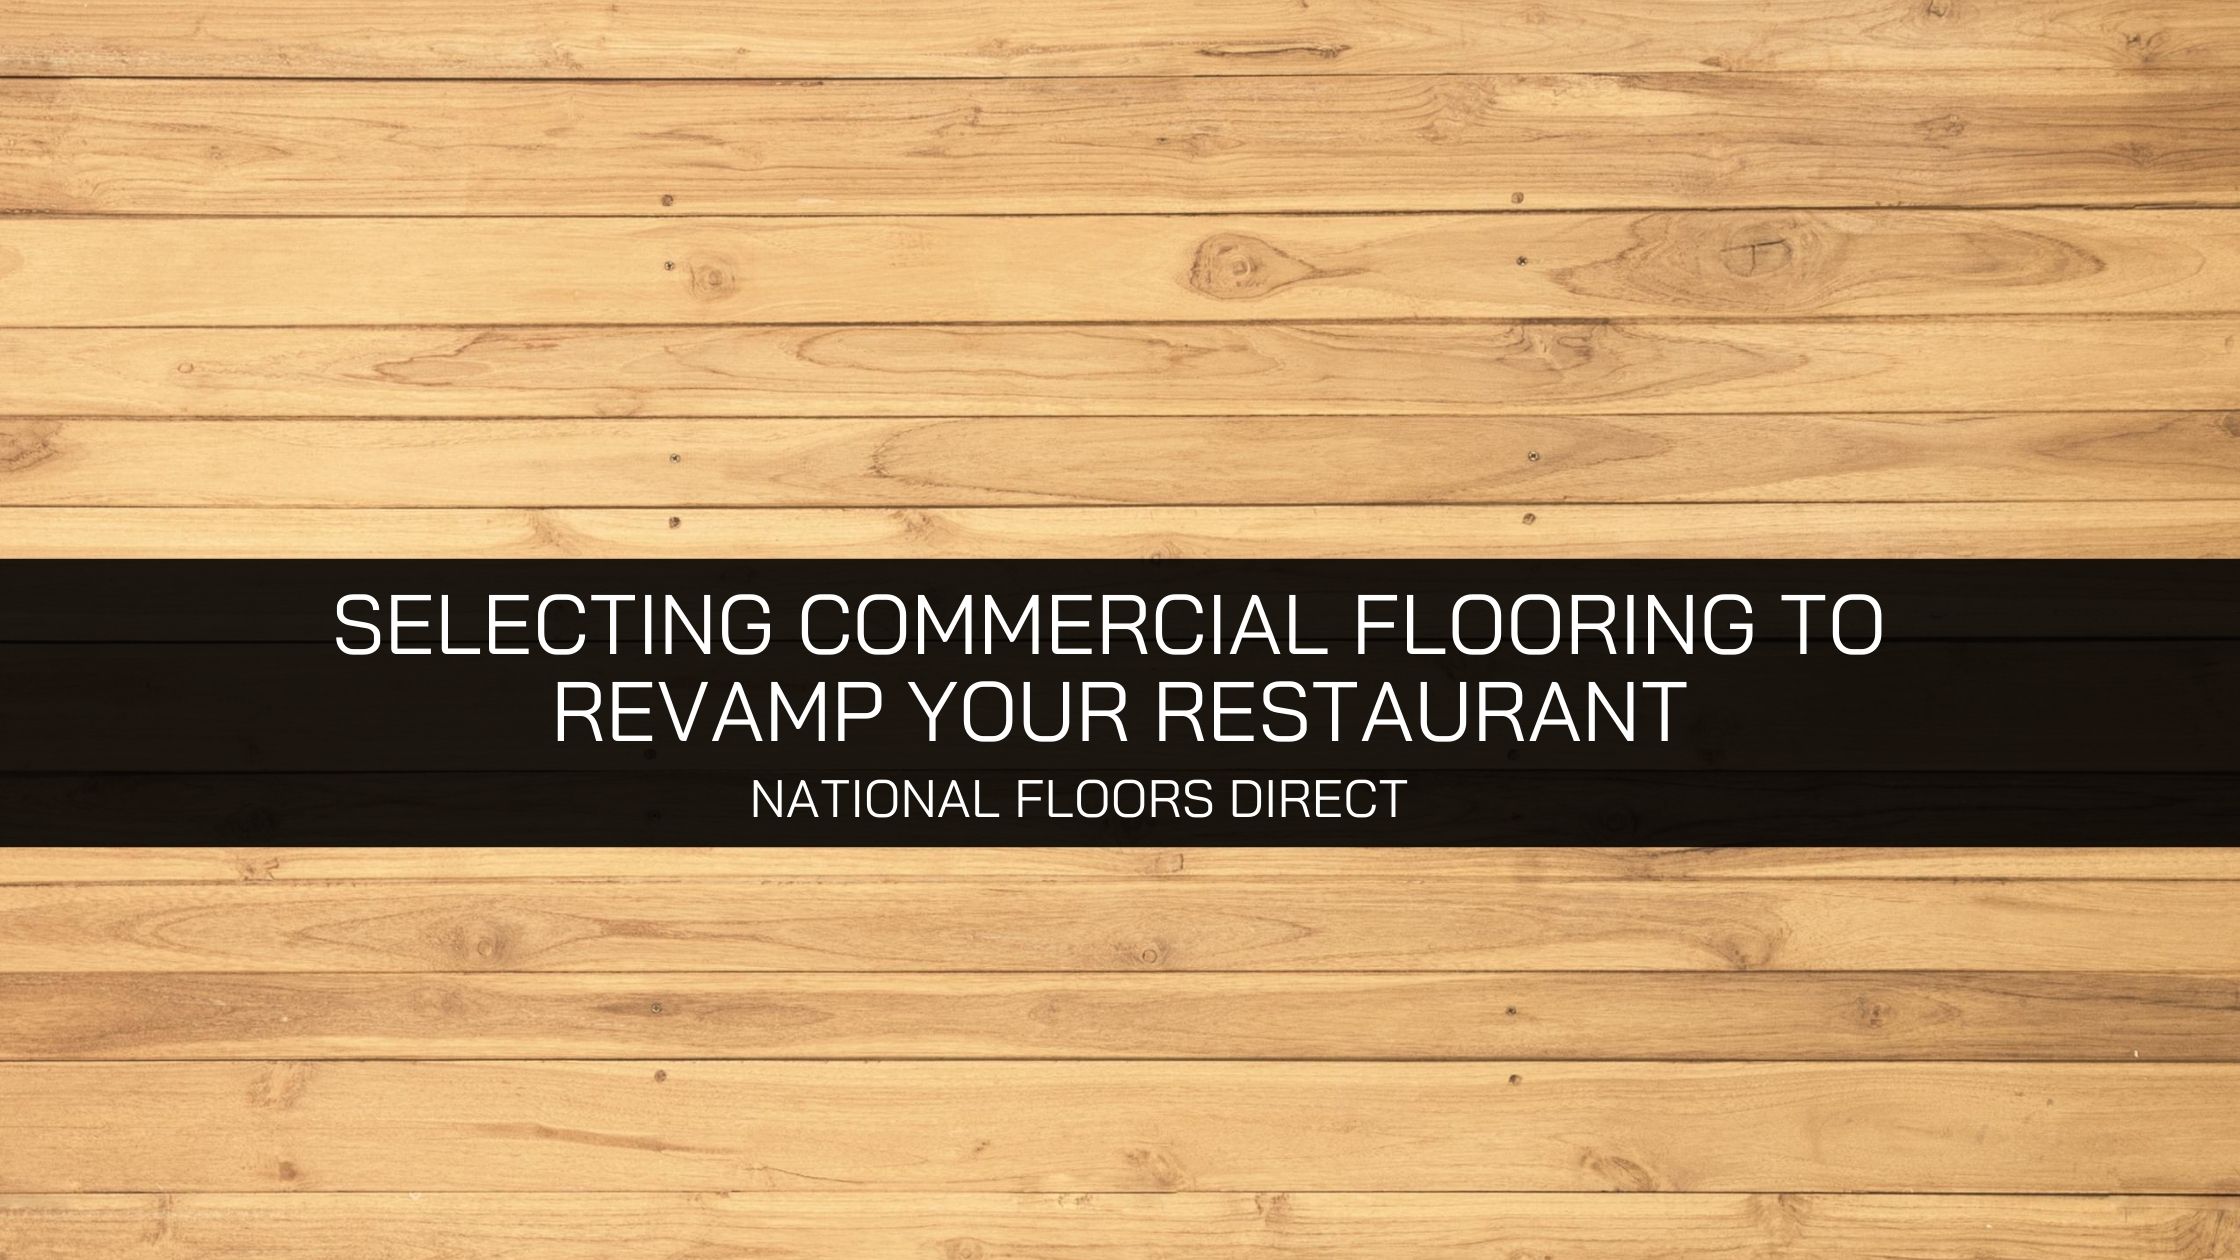 National Floors Direct Offers One of the Largest Selections of Commercial Restaurant Flooring to Revamp Your Restaurant